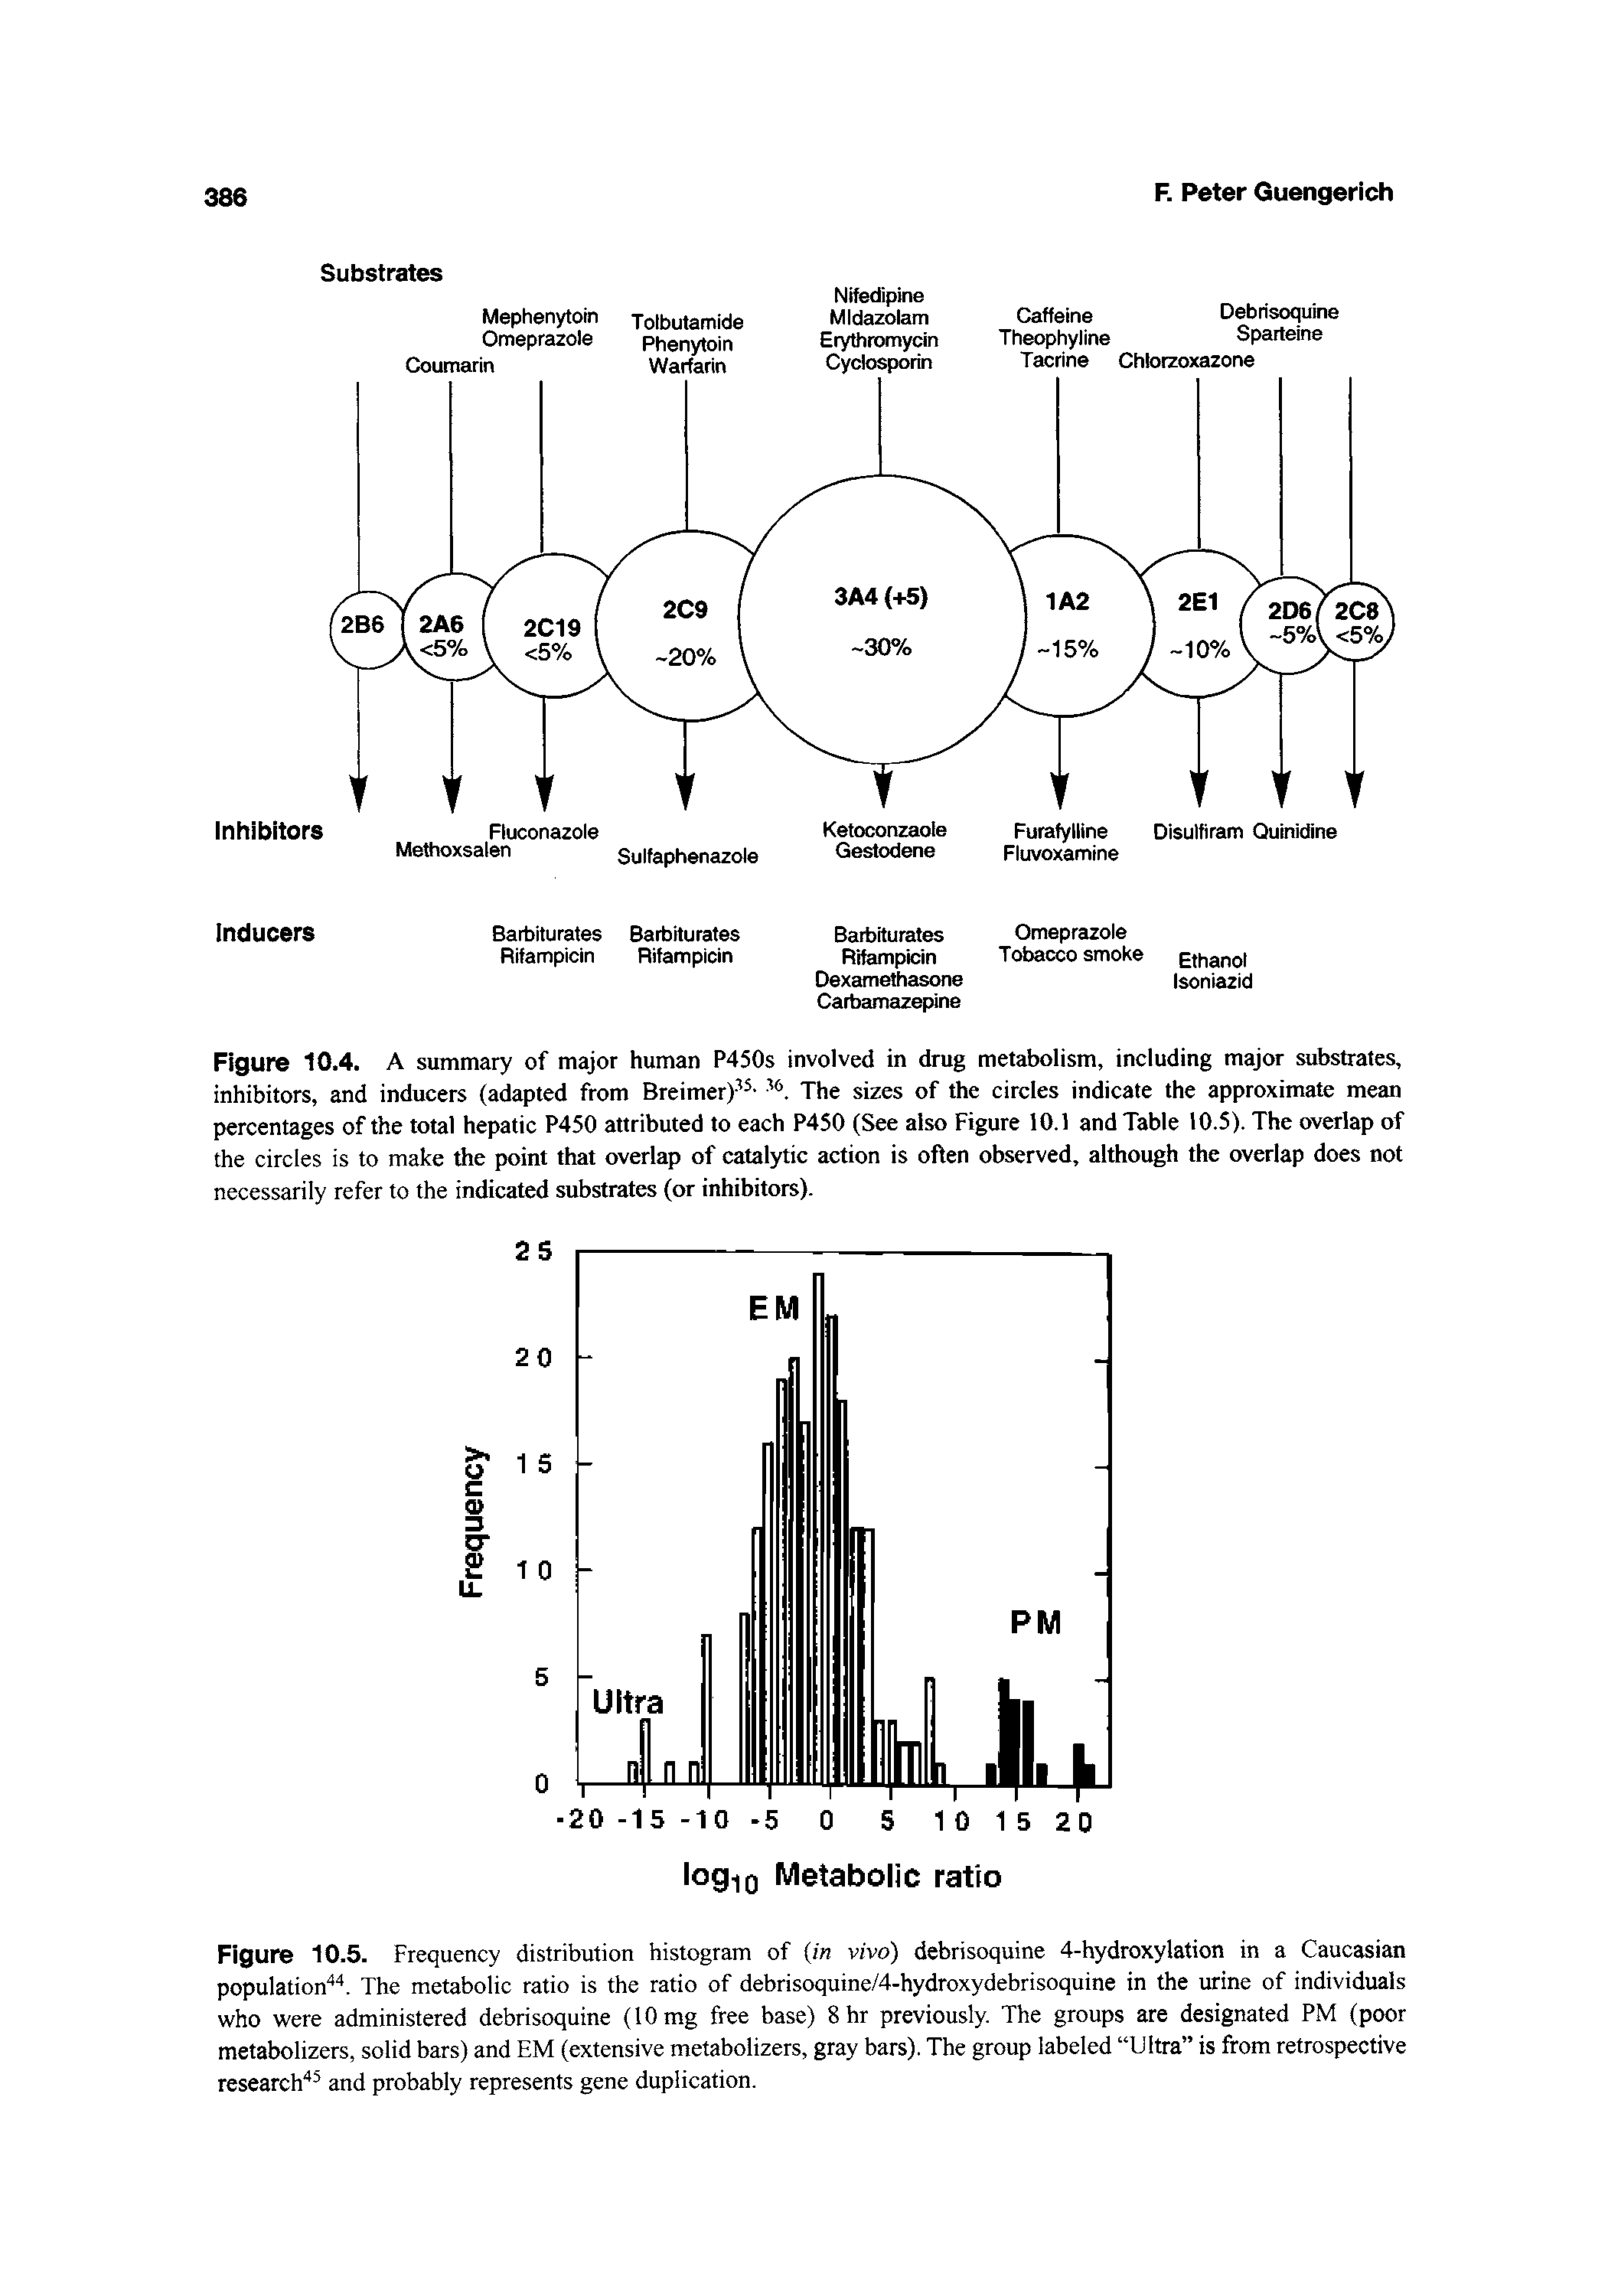 Figure 10.5. Frequency distribution histogram of (in vivo) debrisoquine 4-hydroxylation in a Caucasian population. The metabolic ratio is the ratio of debrisoquine/4-hydroxydebrisoquine in the urine of individuals who were administered debrisoquine (10 mg free base) 8 hr previously. The groups are designated PM (poor metabolizers, solid bars) and EM (extensive metabolizers, gray bars). The group labeled Ultra is from retrospective research and probably represents gene duplication.